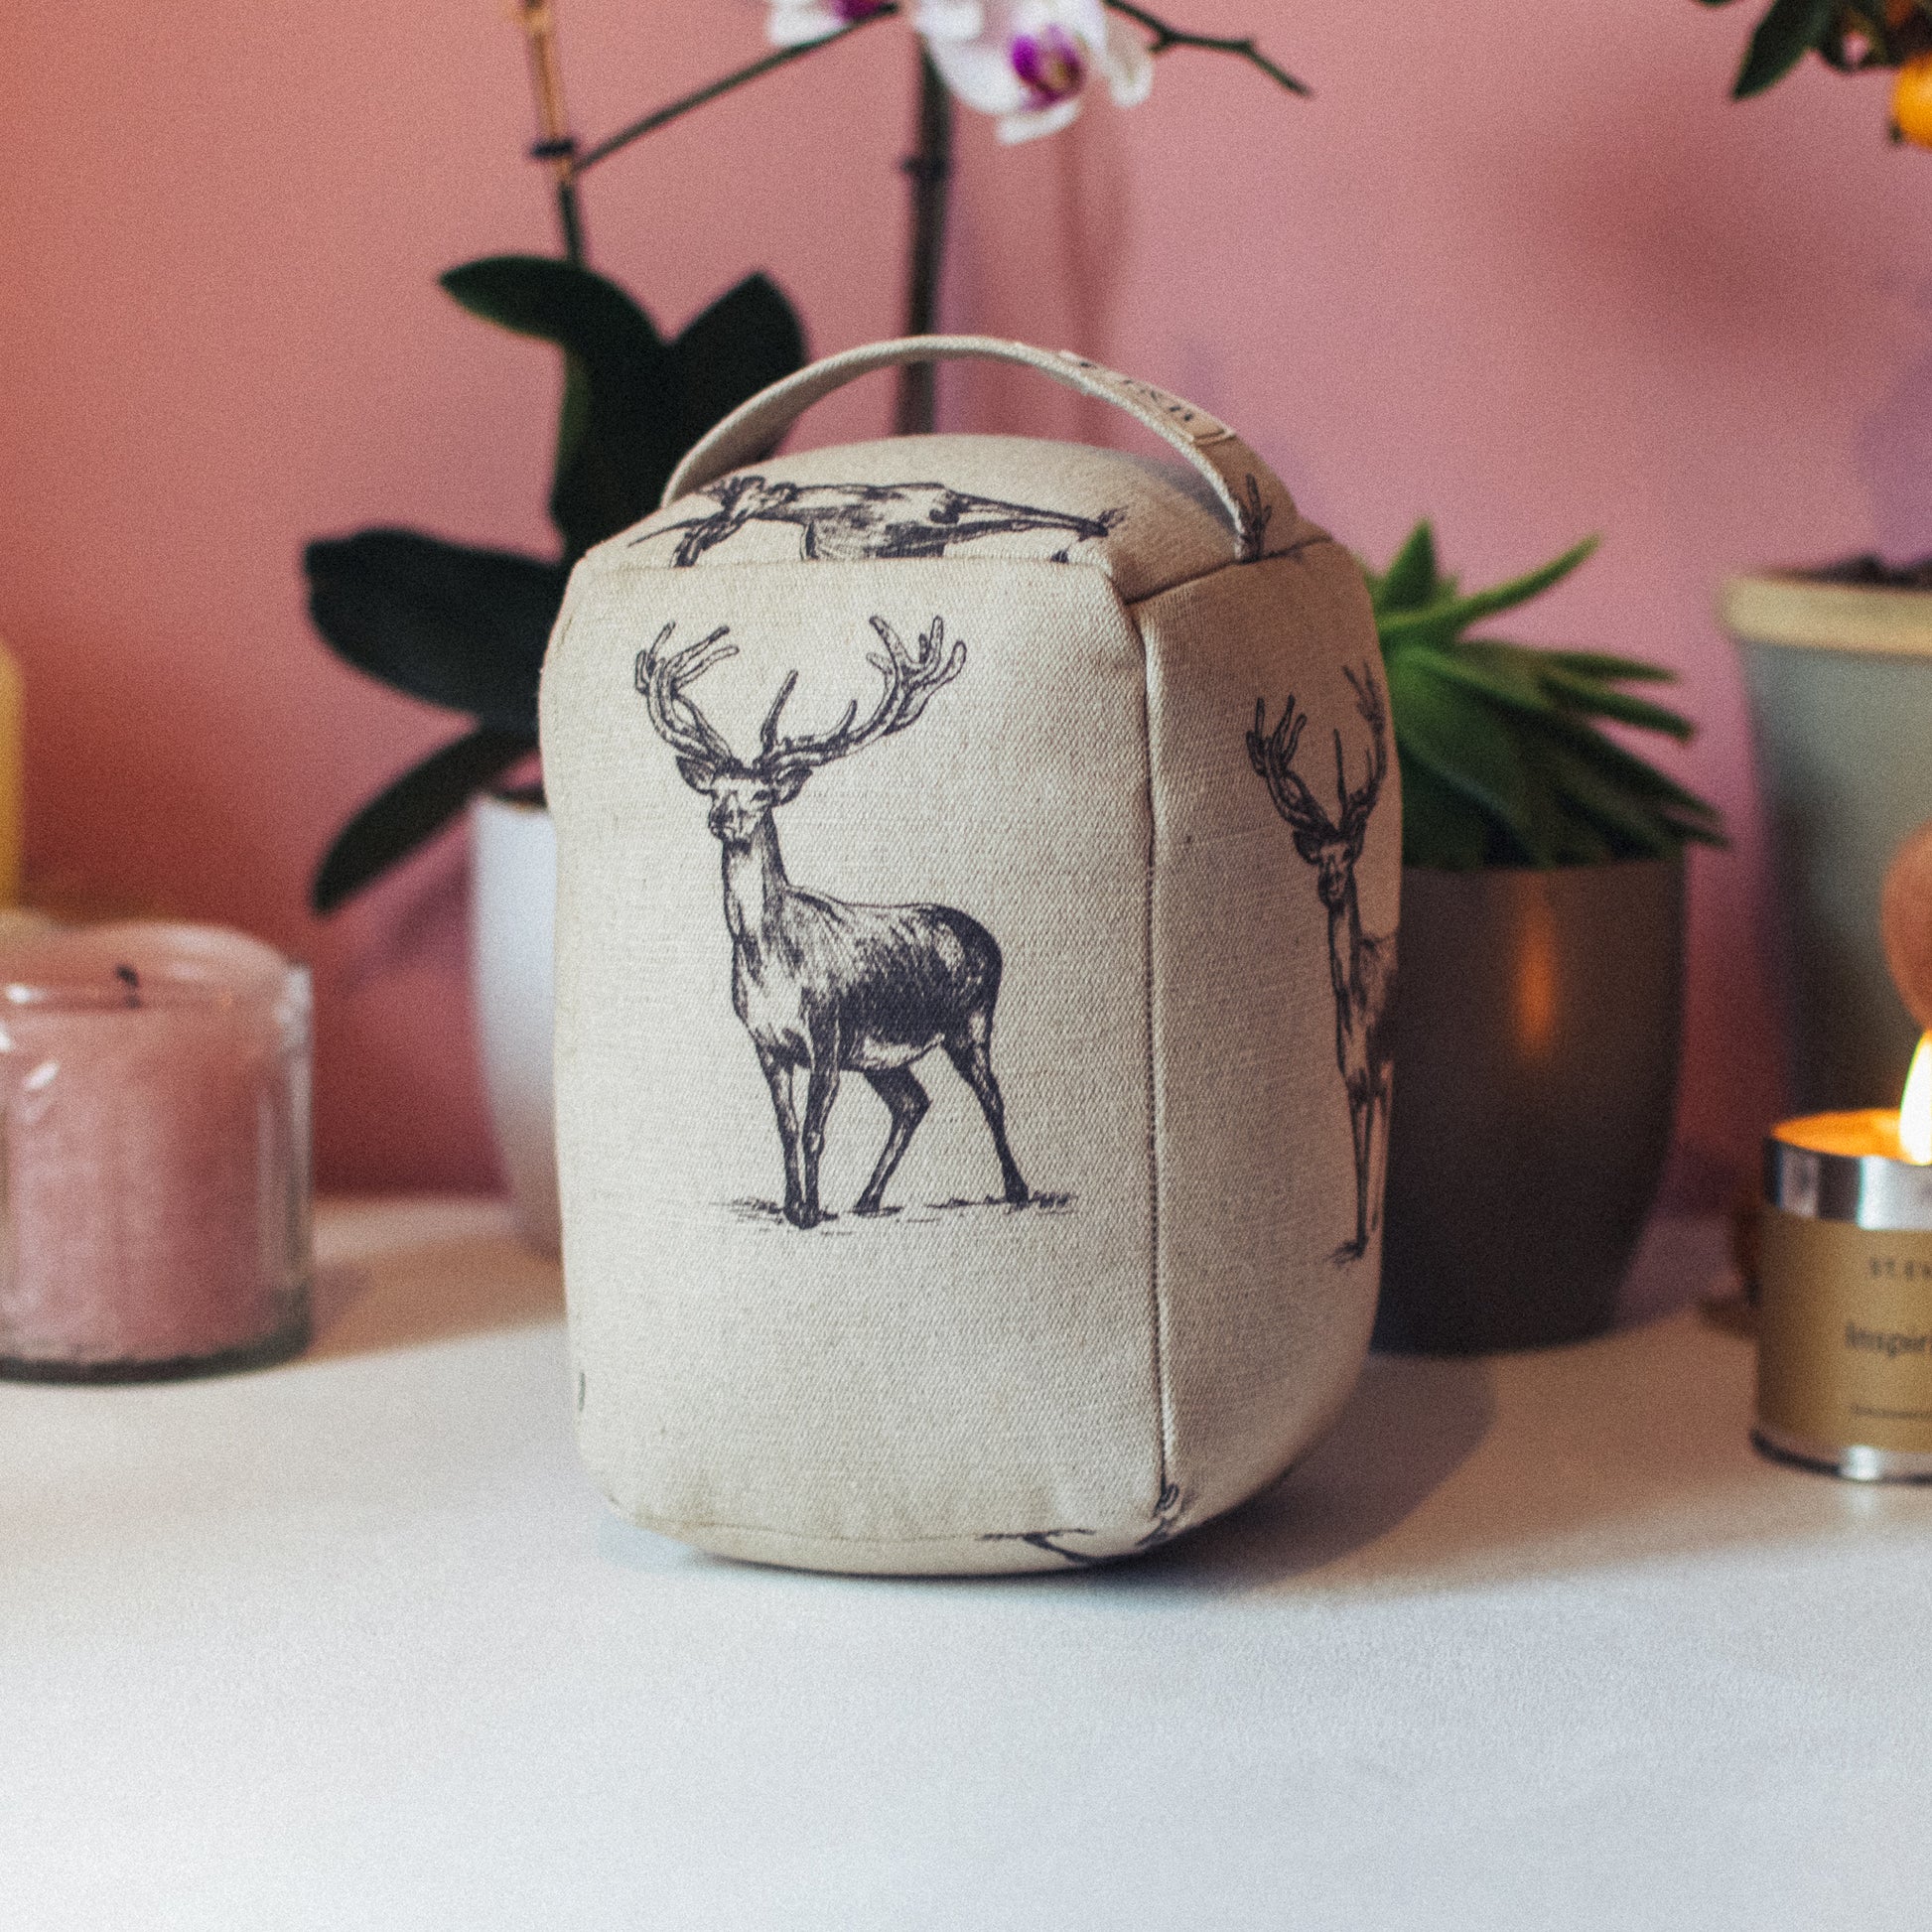 F&B Crafts handmade stag print linen doorstop made in yorkshire - perfect touch of country home decor